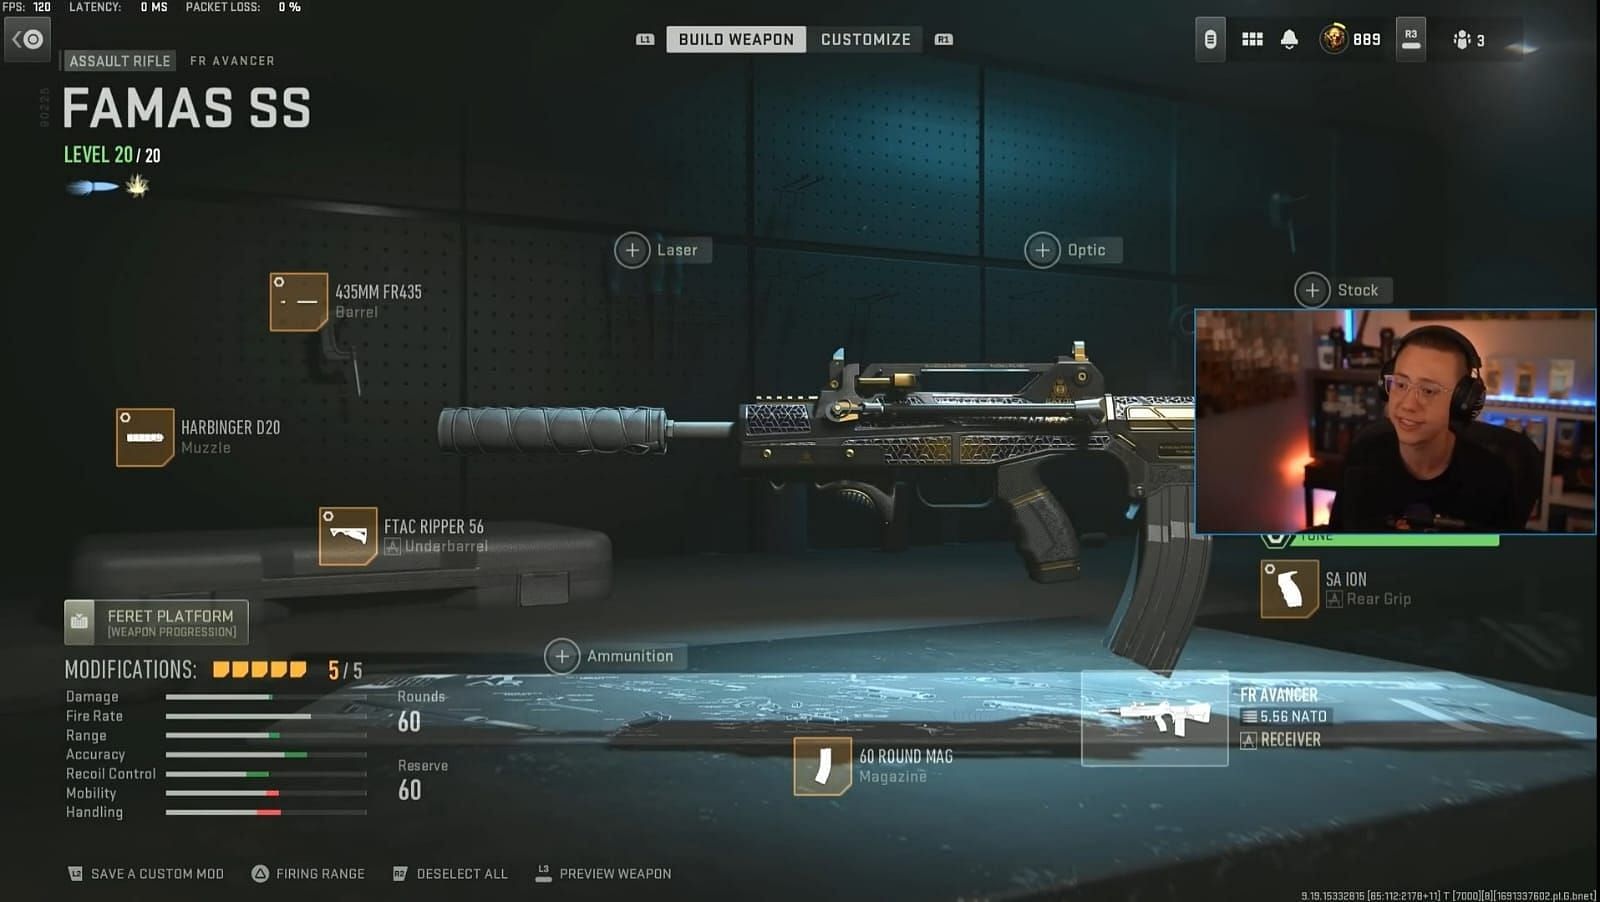 FR Avancer TTK loadout in Warzone 2 (Image via Activision and YouTube/WhosImmortal)